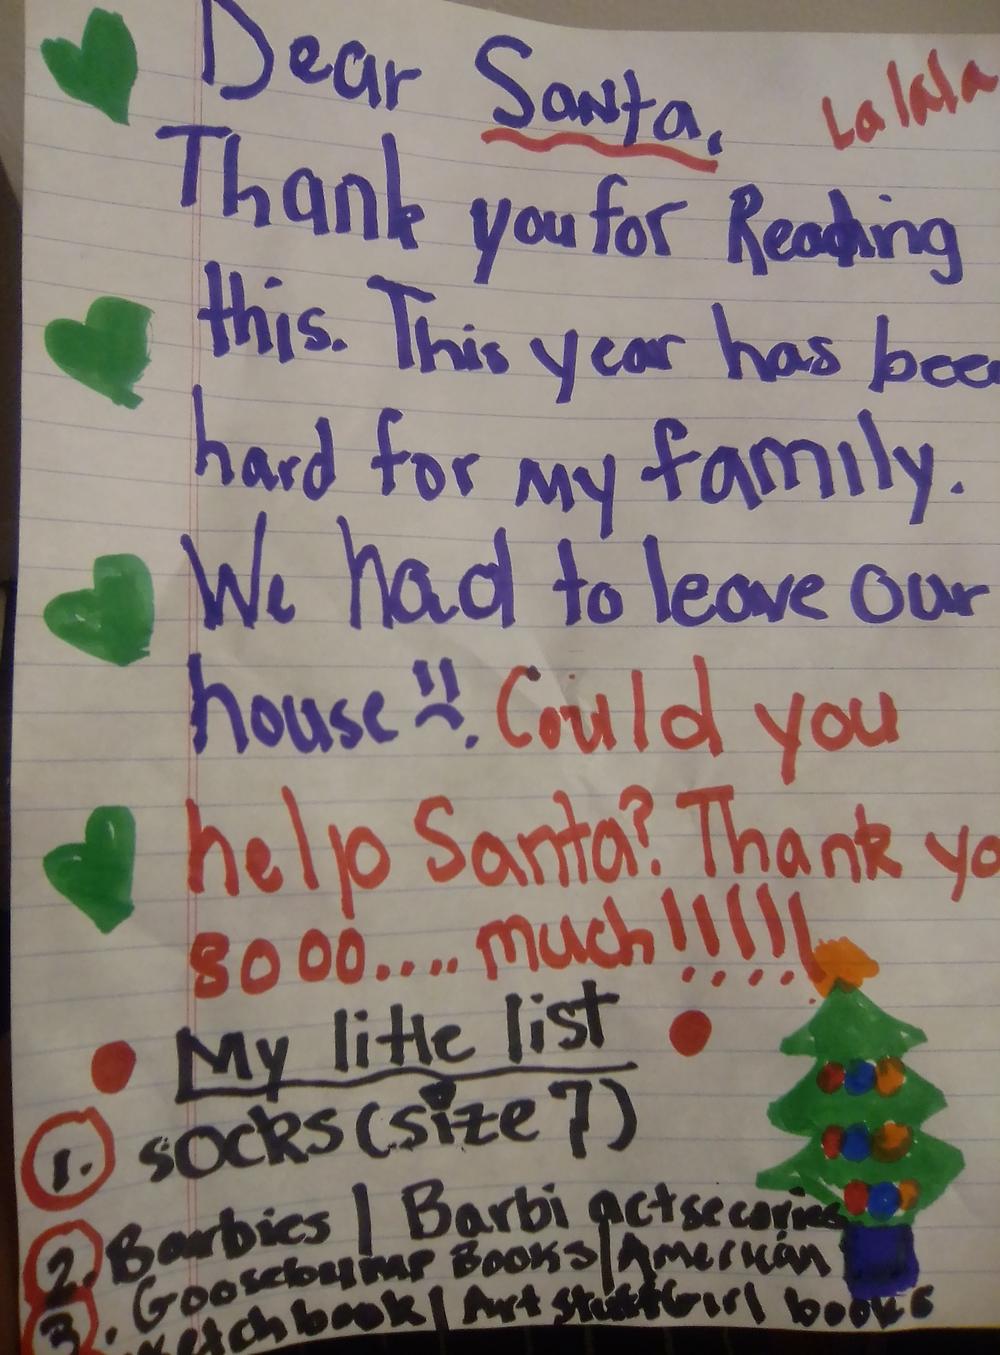 Morgan, 8, wrote to Santa for the first time in what became a difficult year for her family because of the coronavirus pandemic.